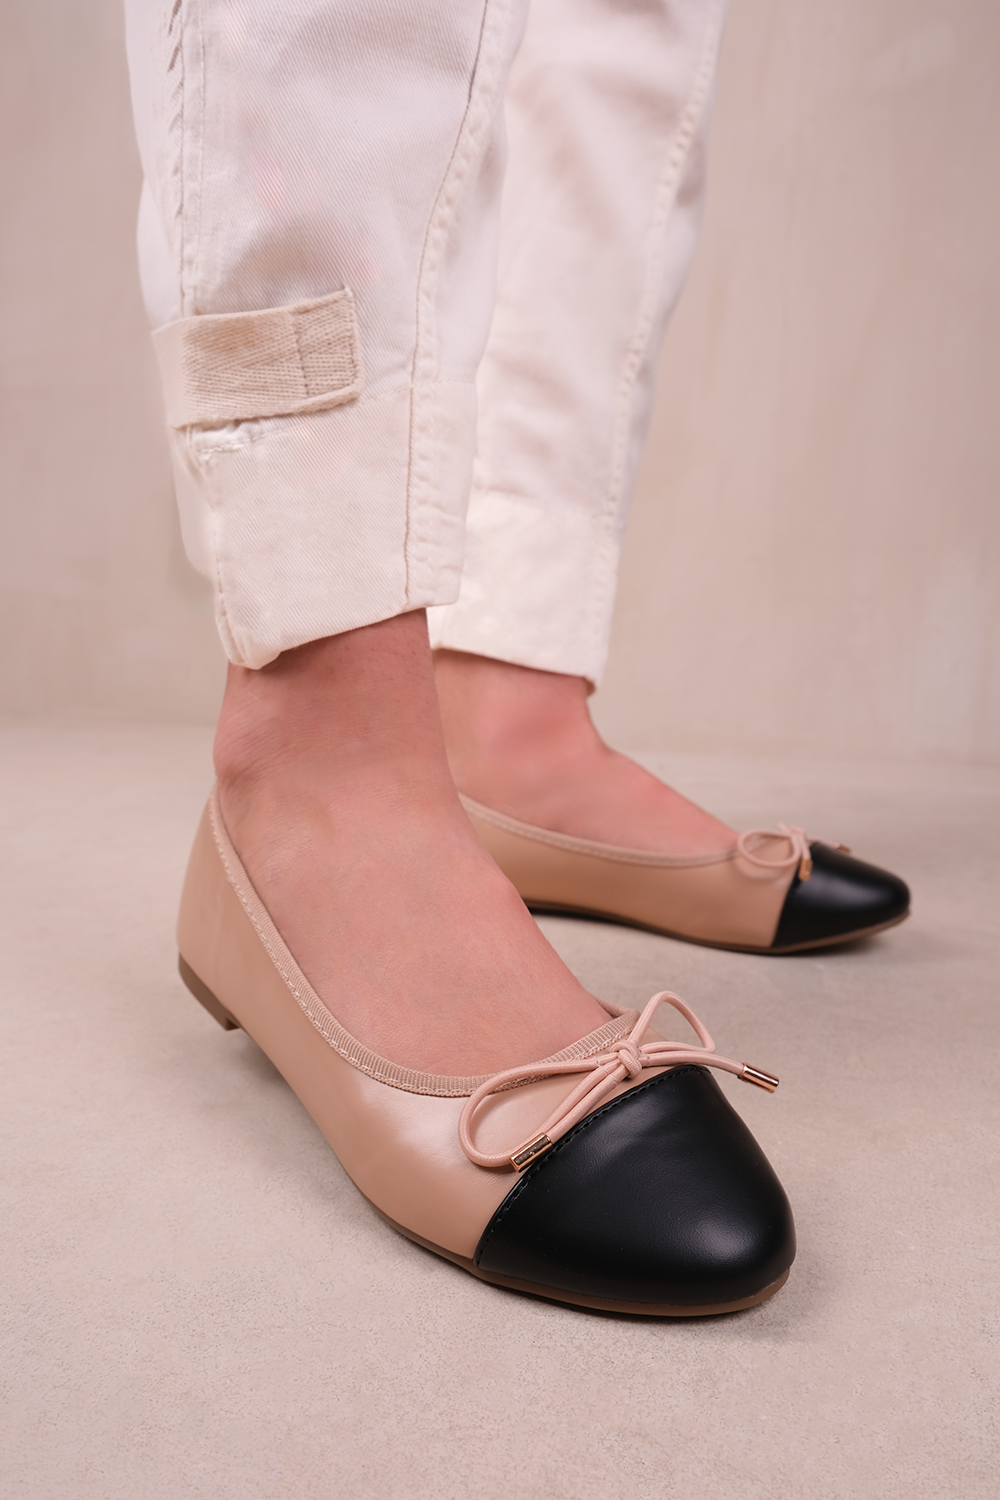 JANICE EXTRA WIDE BALLERINA FLATS WITH FRON BOW DETAIL IN NUDE FAUX LEATHER